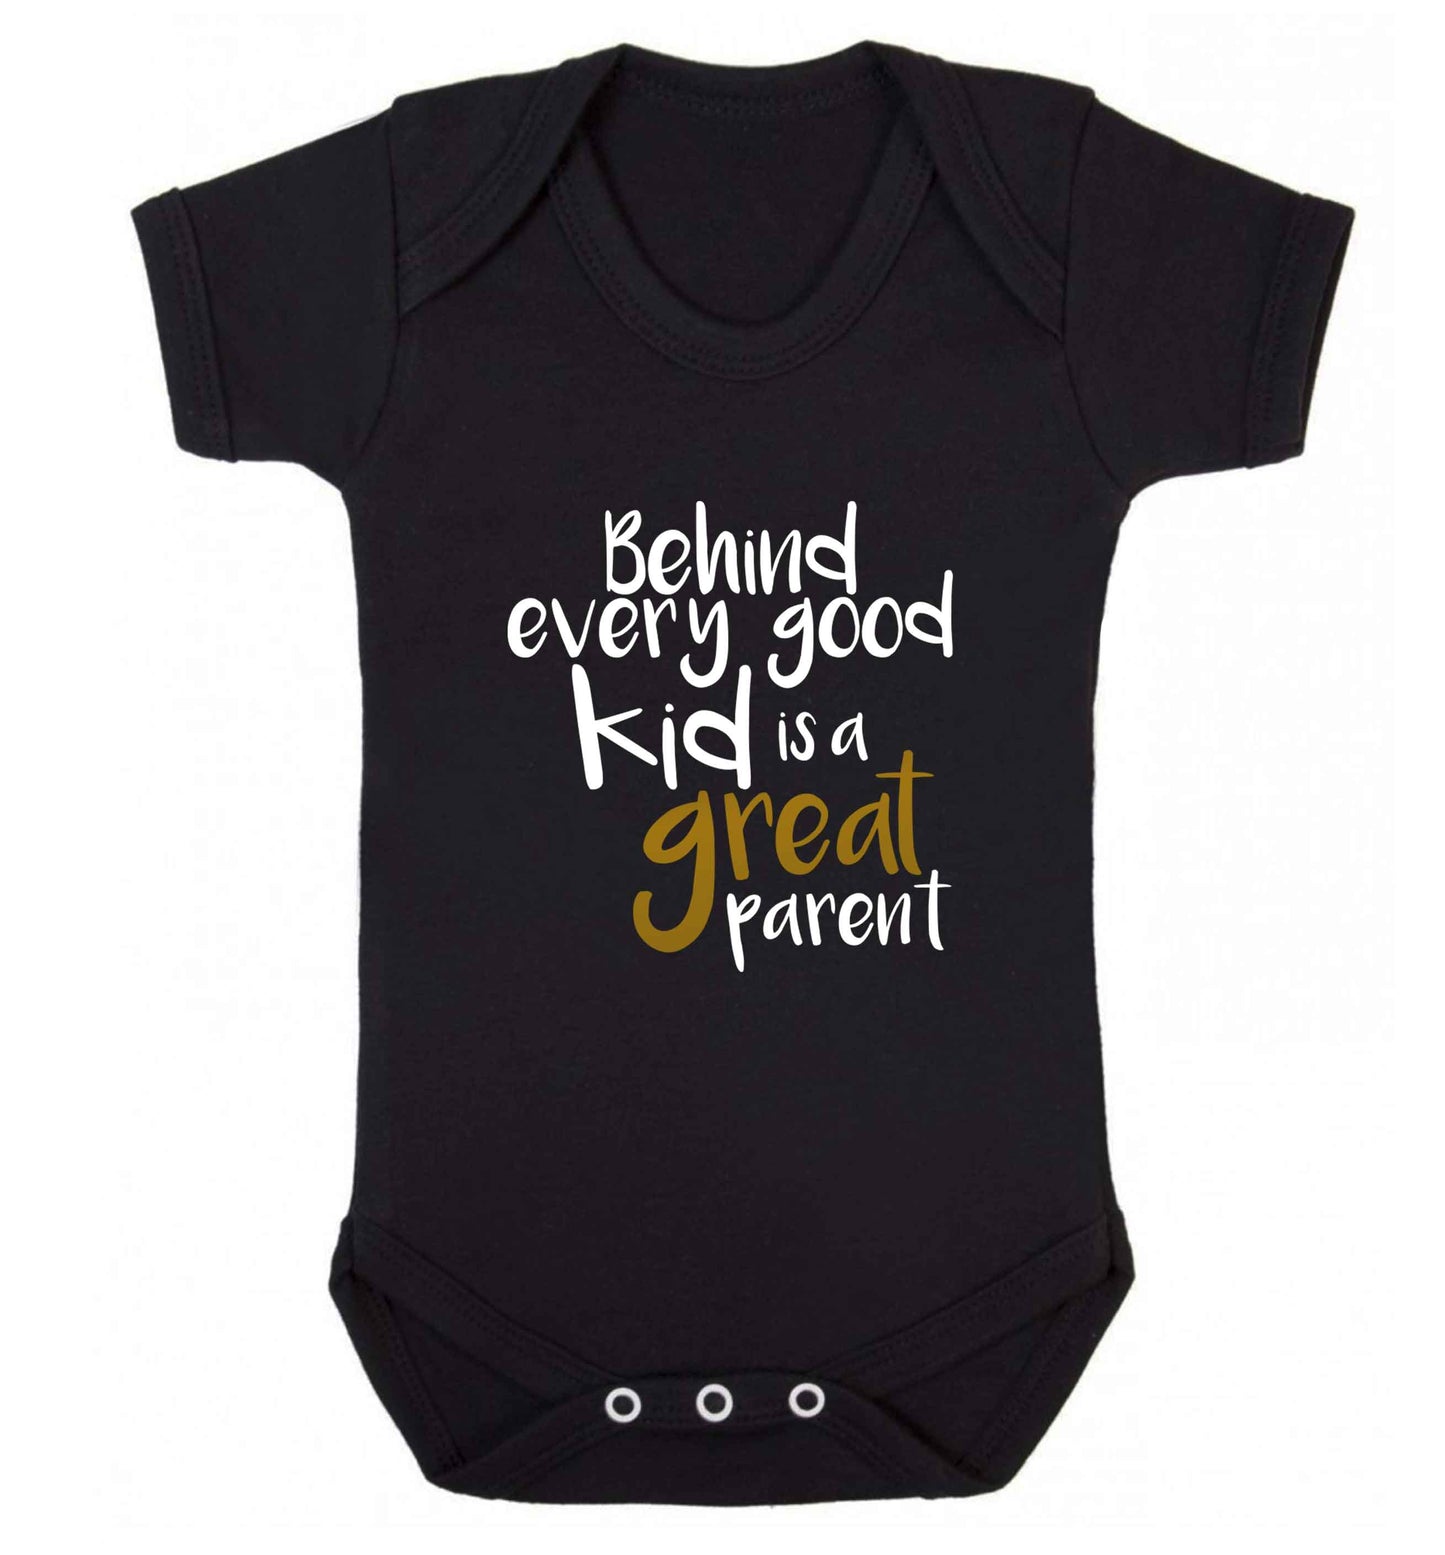 Behind every good kid is a great parent baby vest black 18-24 months